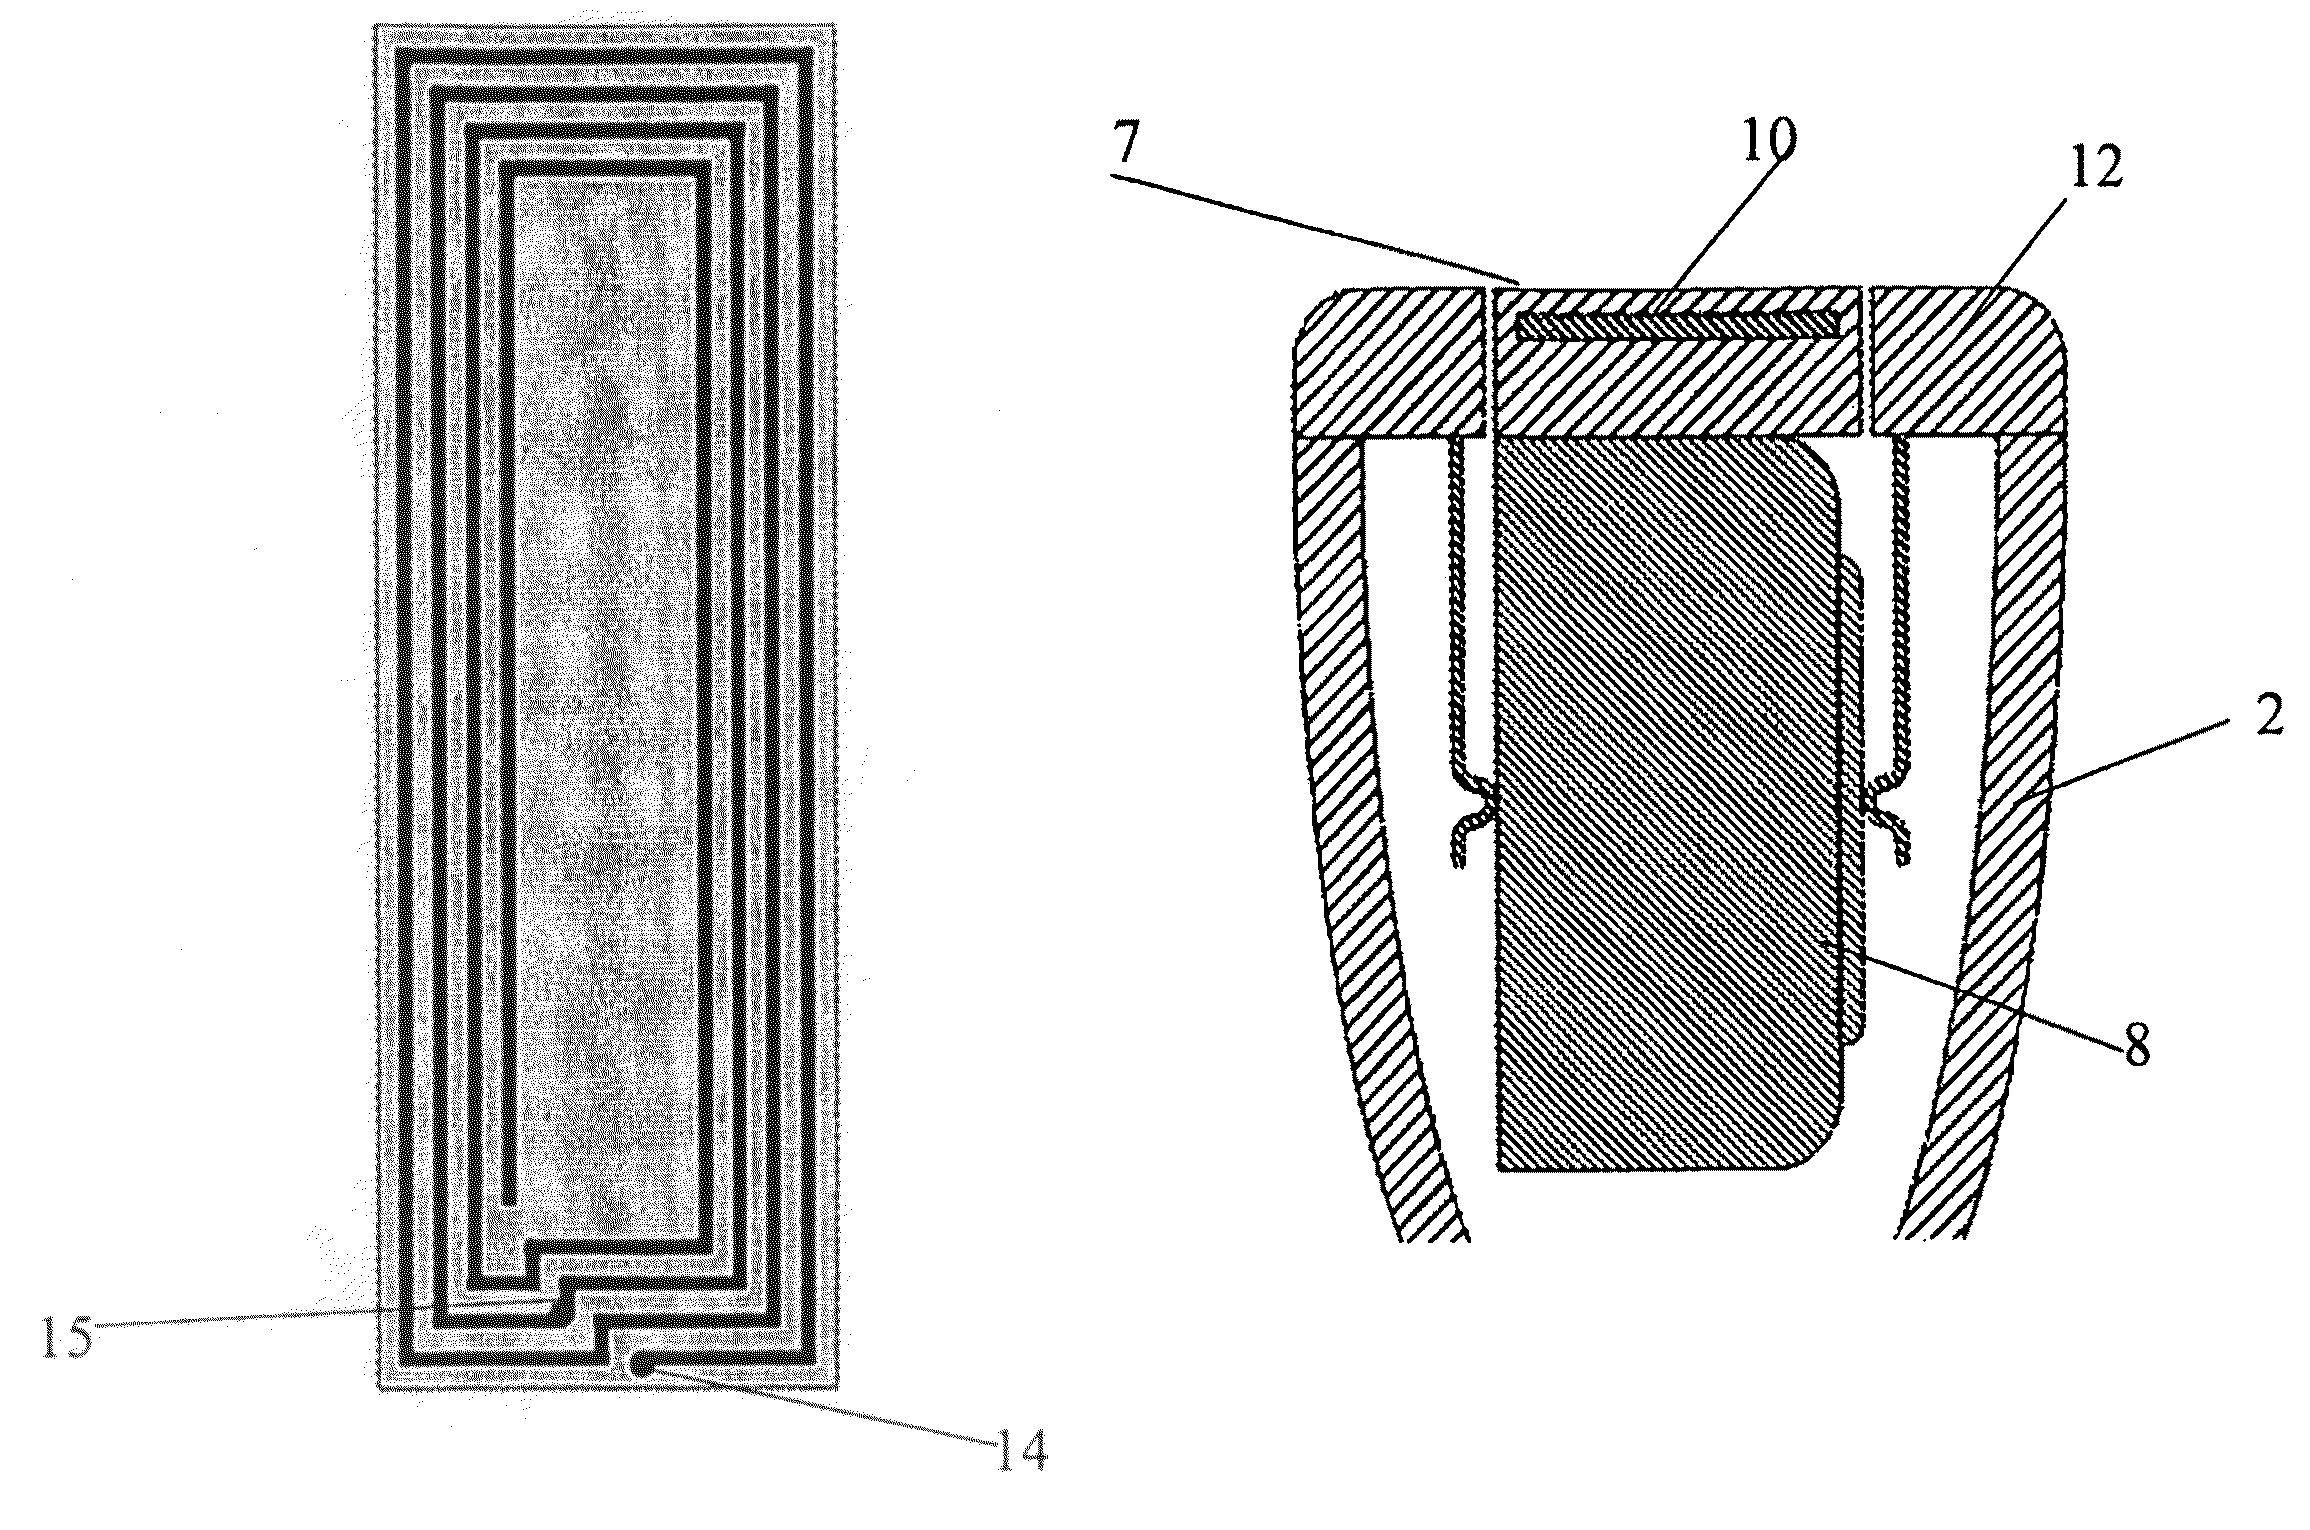 Hearing aid with antenna for reception and transmission of electromagnetic signals